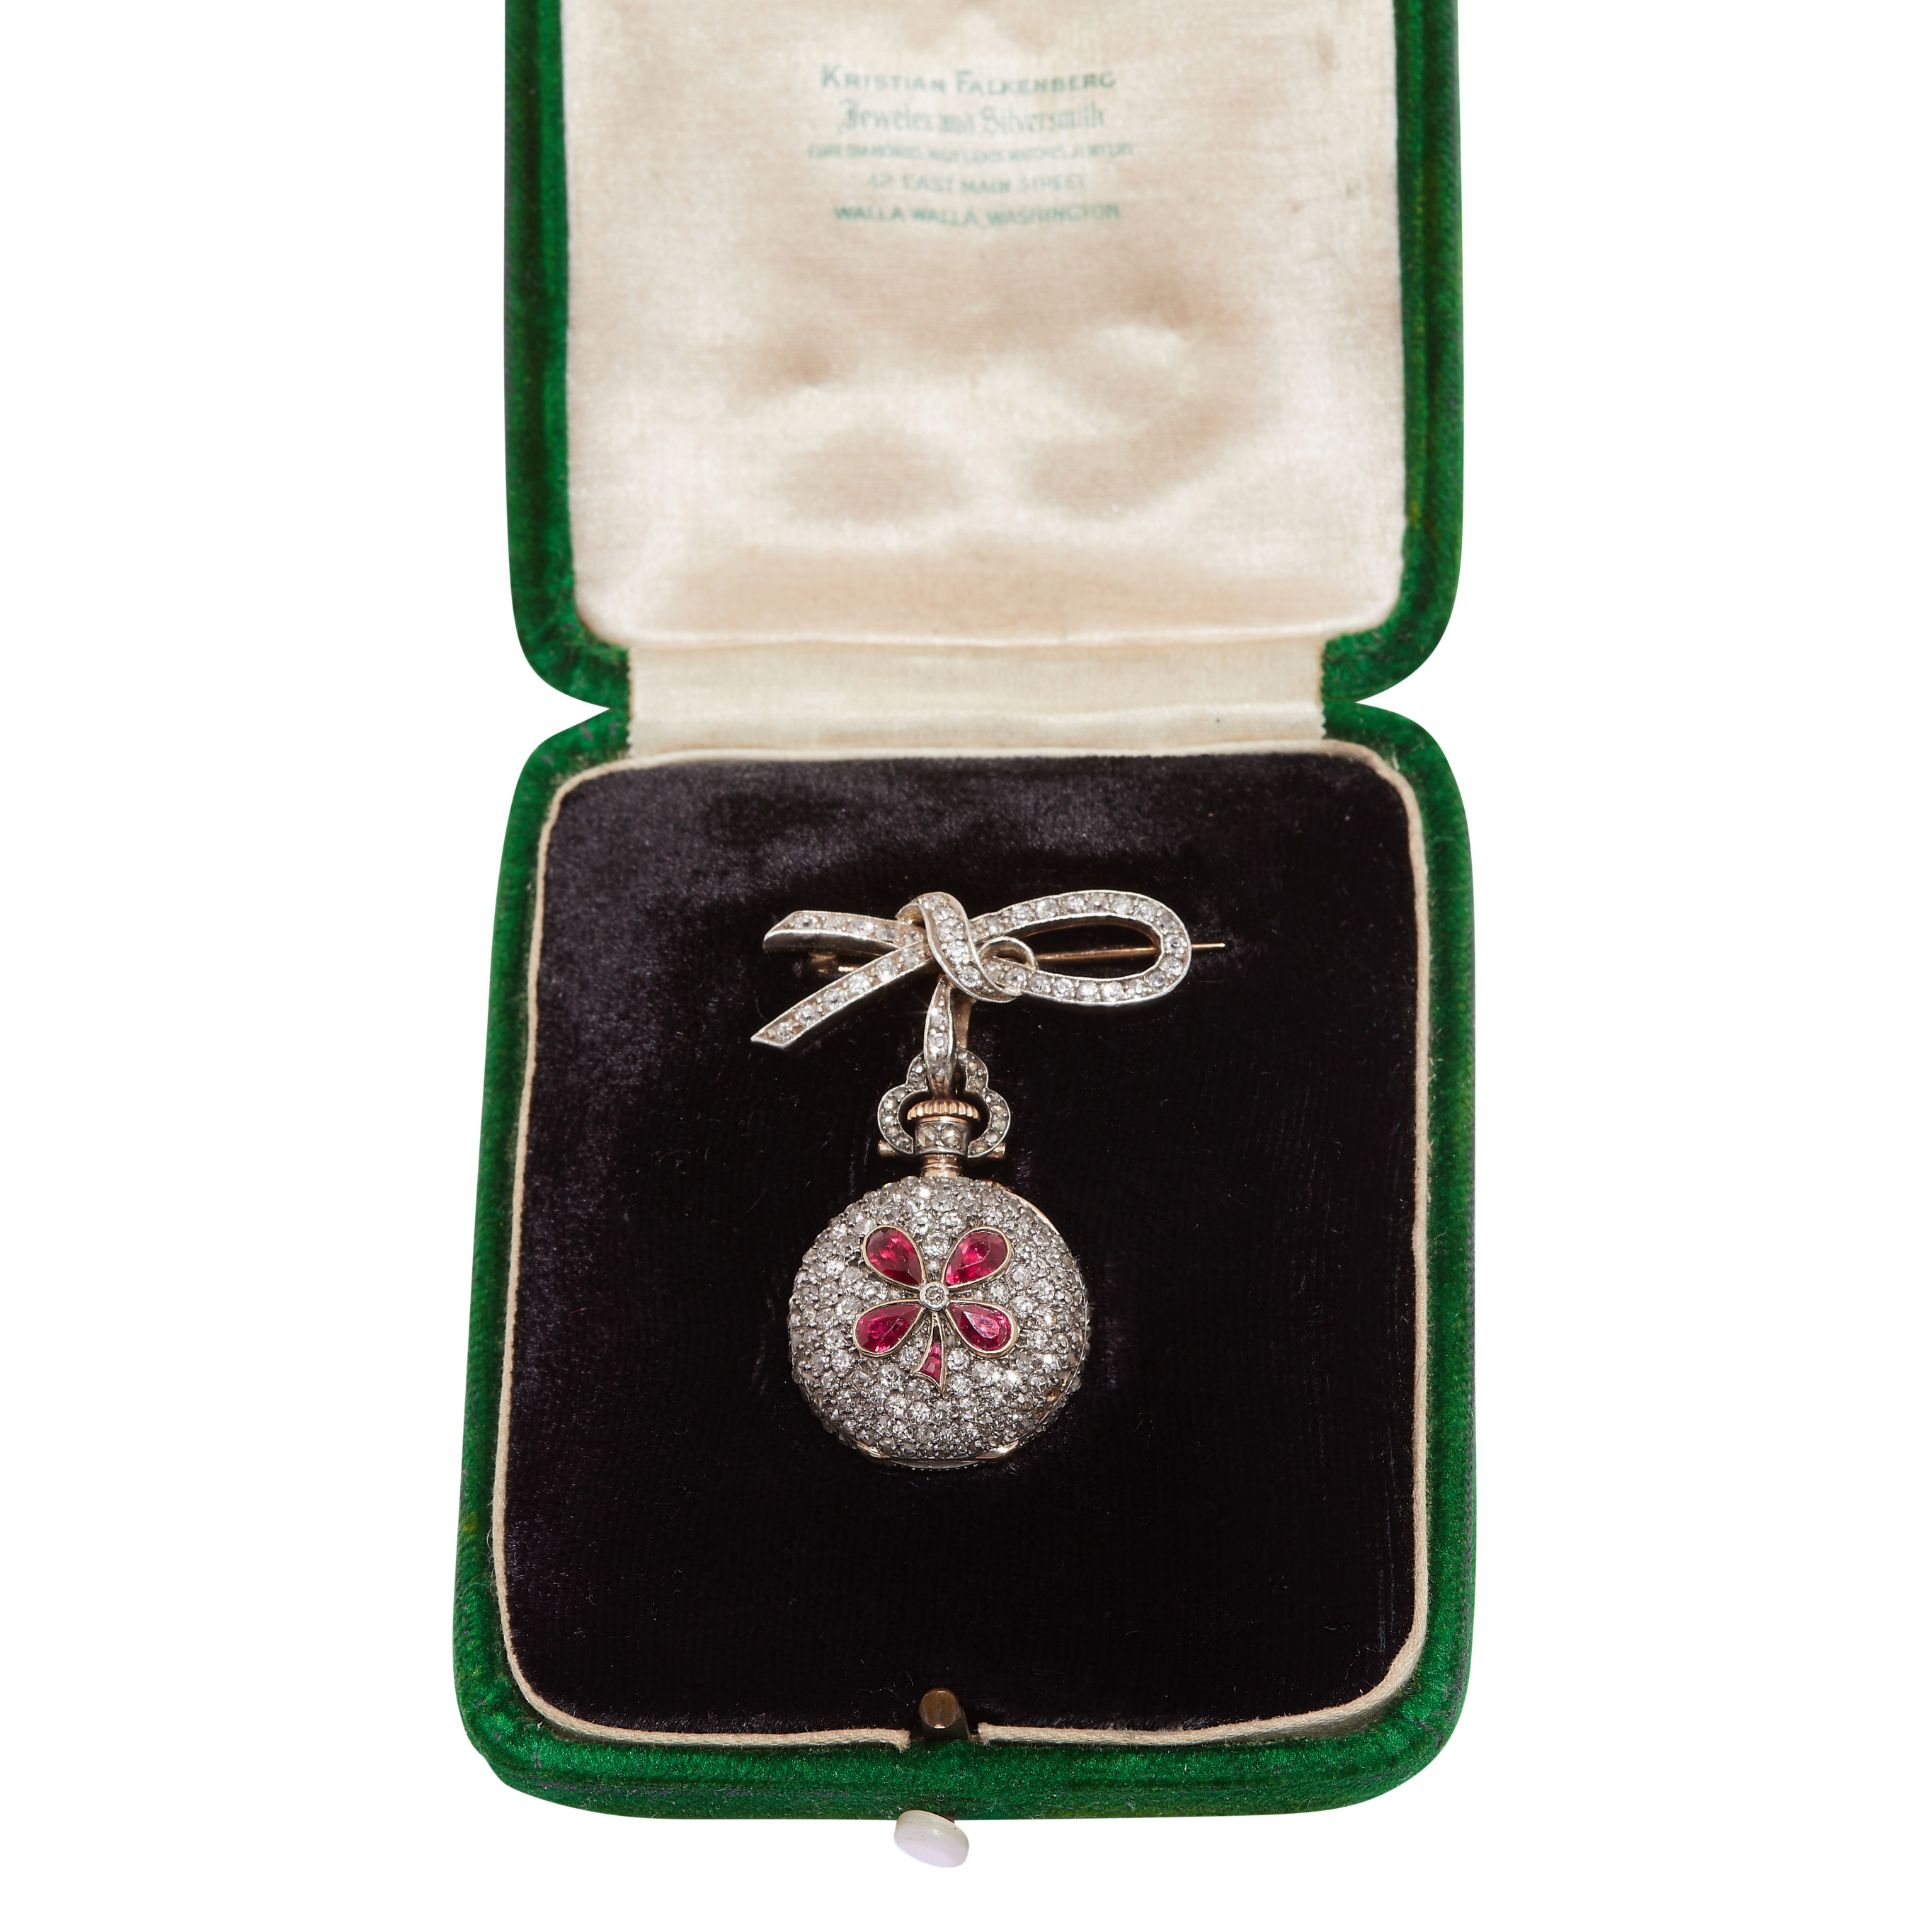 RARE ANTIQUE RUBY AND DIAMOND POCKET WATCH WITH BROOCH - Image 3 of 3